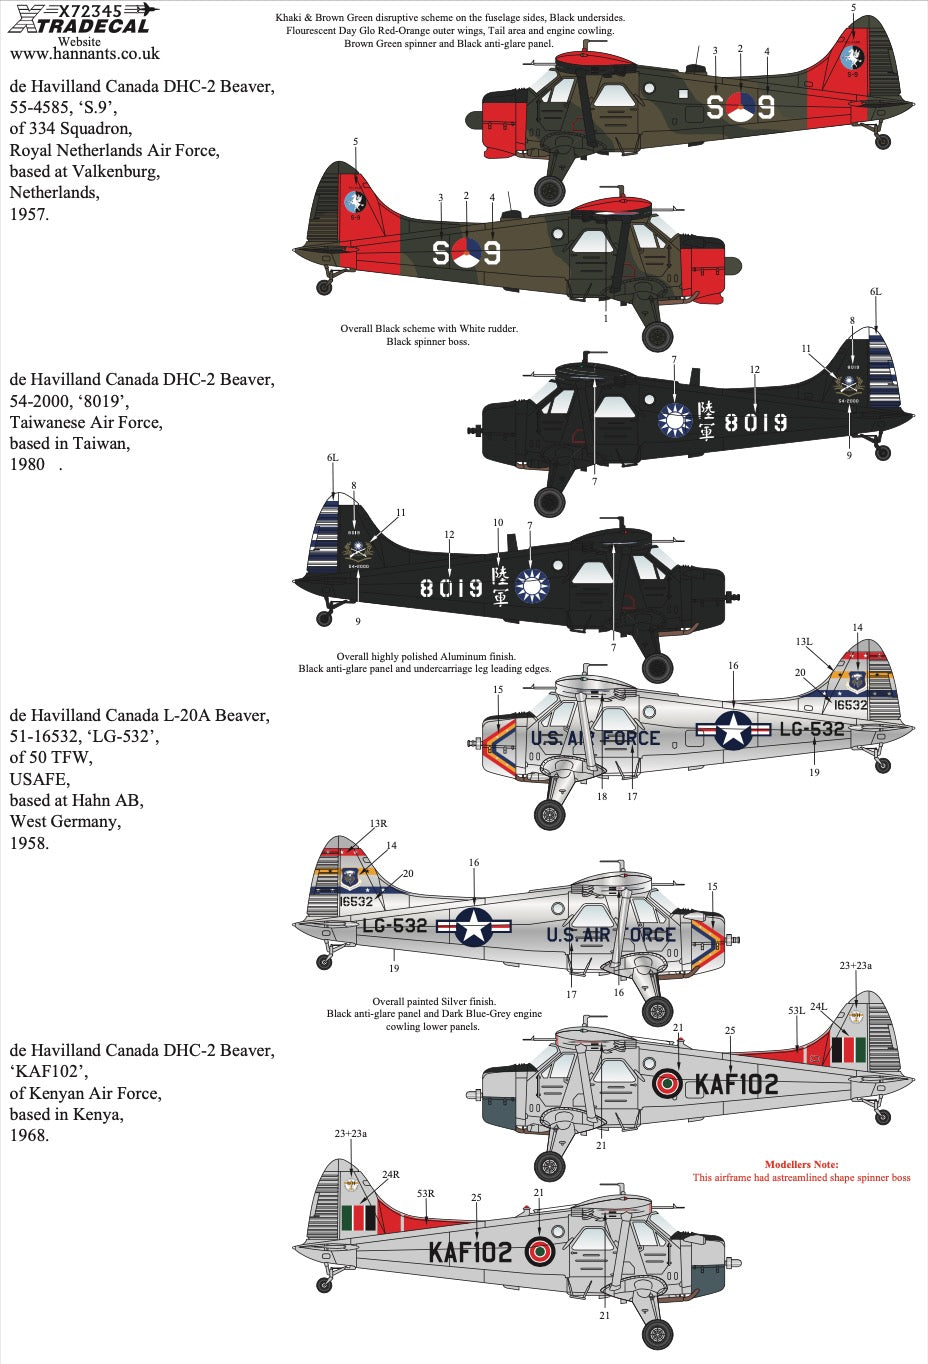 Xtradecal X72345 DHC-2 Beaver Worldwide Collection 1/72